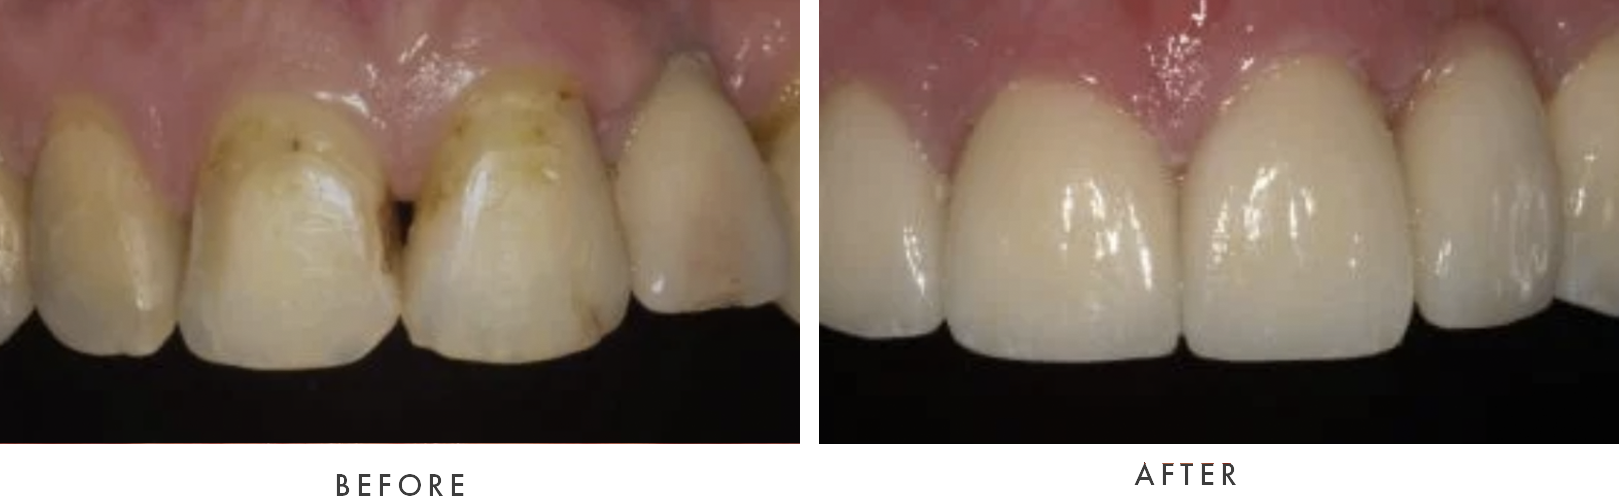 dental crown combined case 3 drscruggs